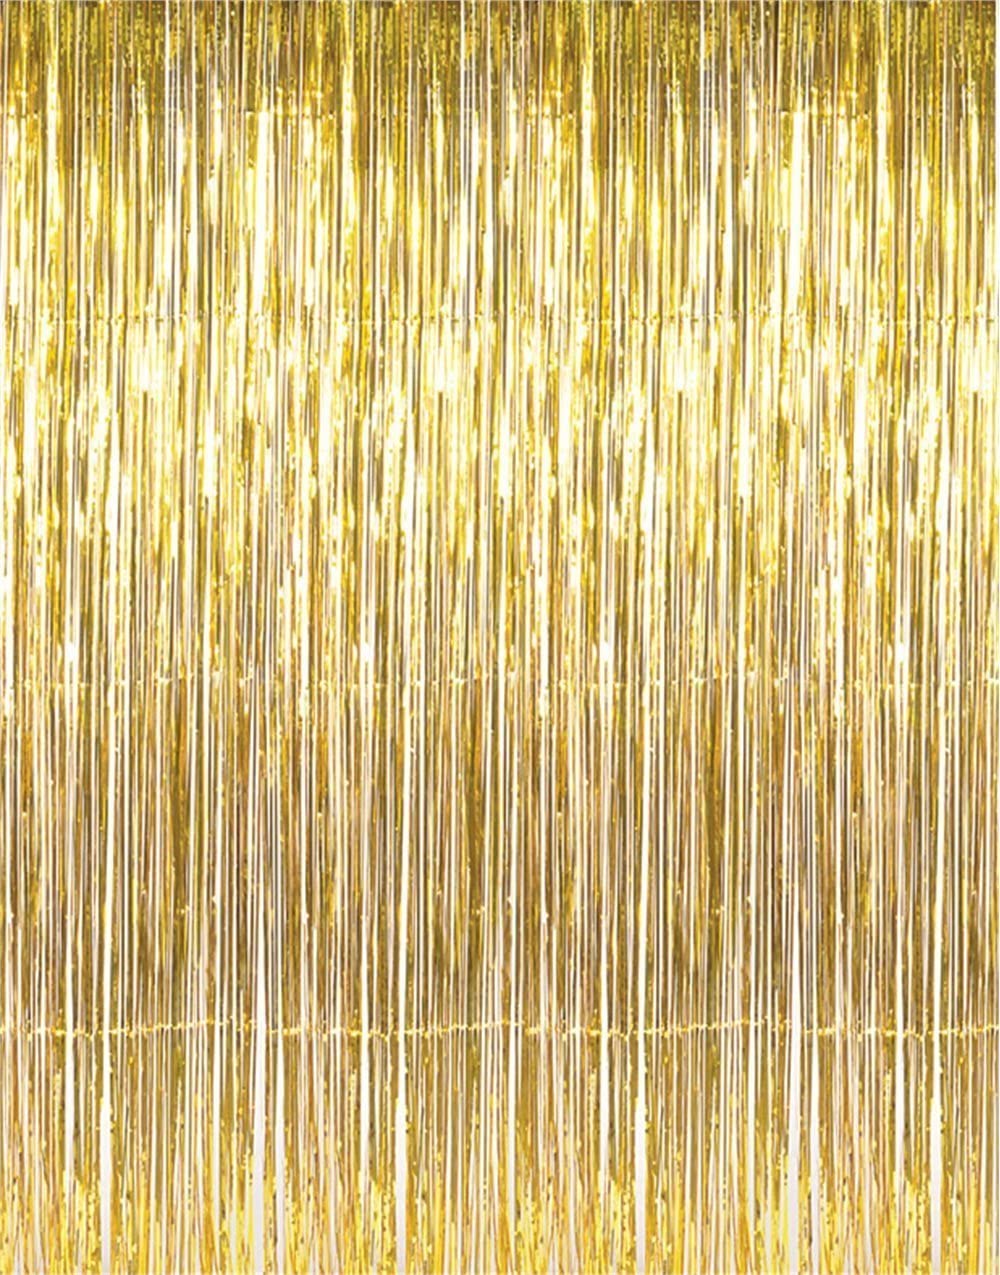 Tinsel Foil Fringe Garland | Wholesale Party Supplies Gold